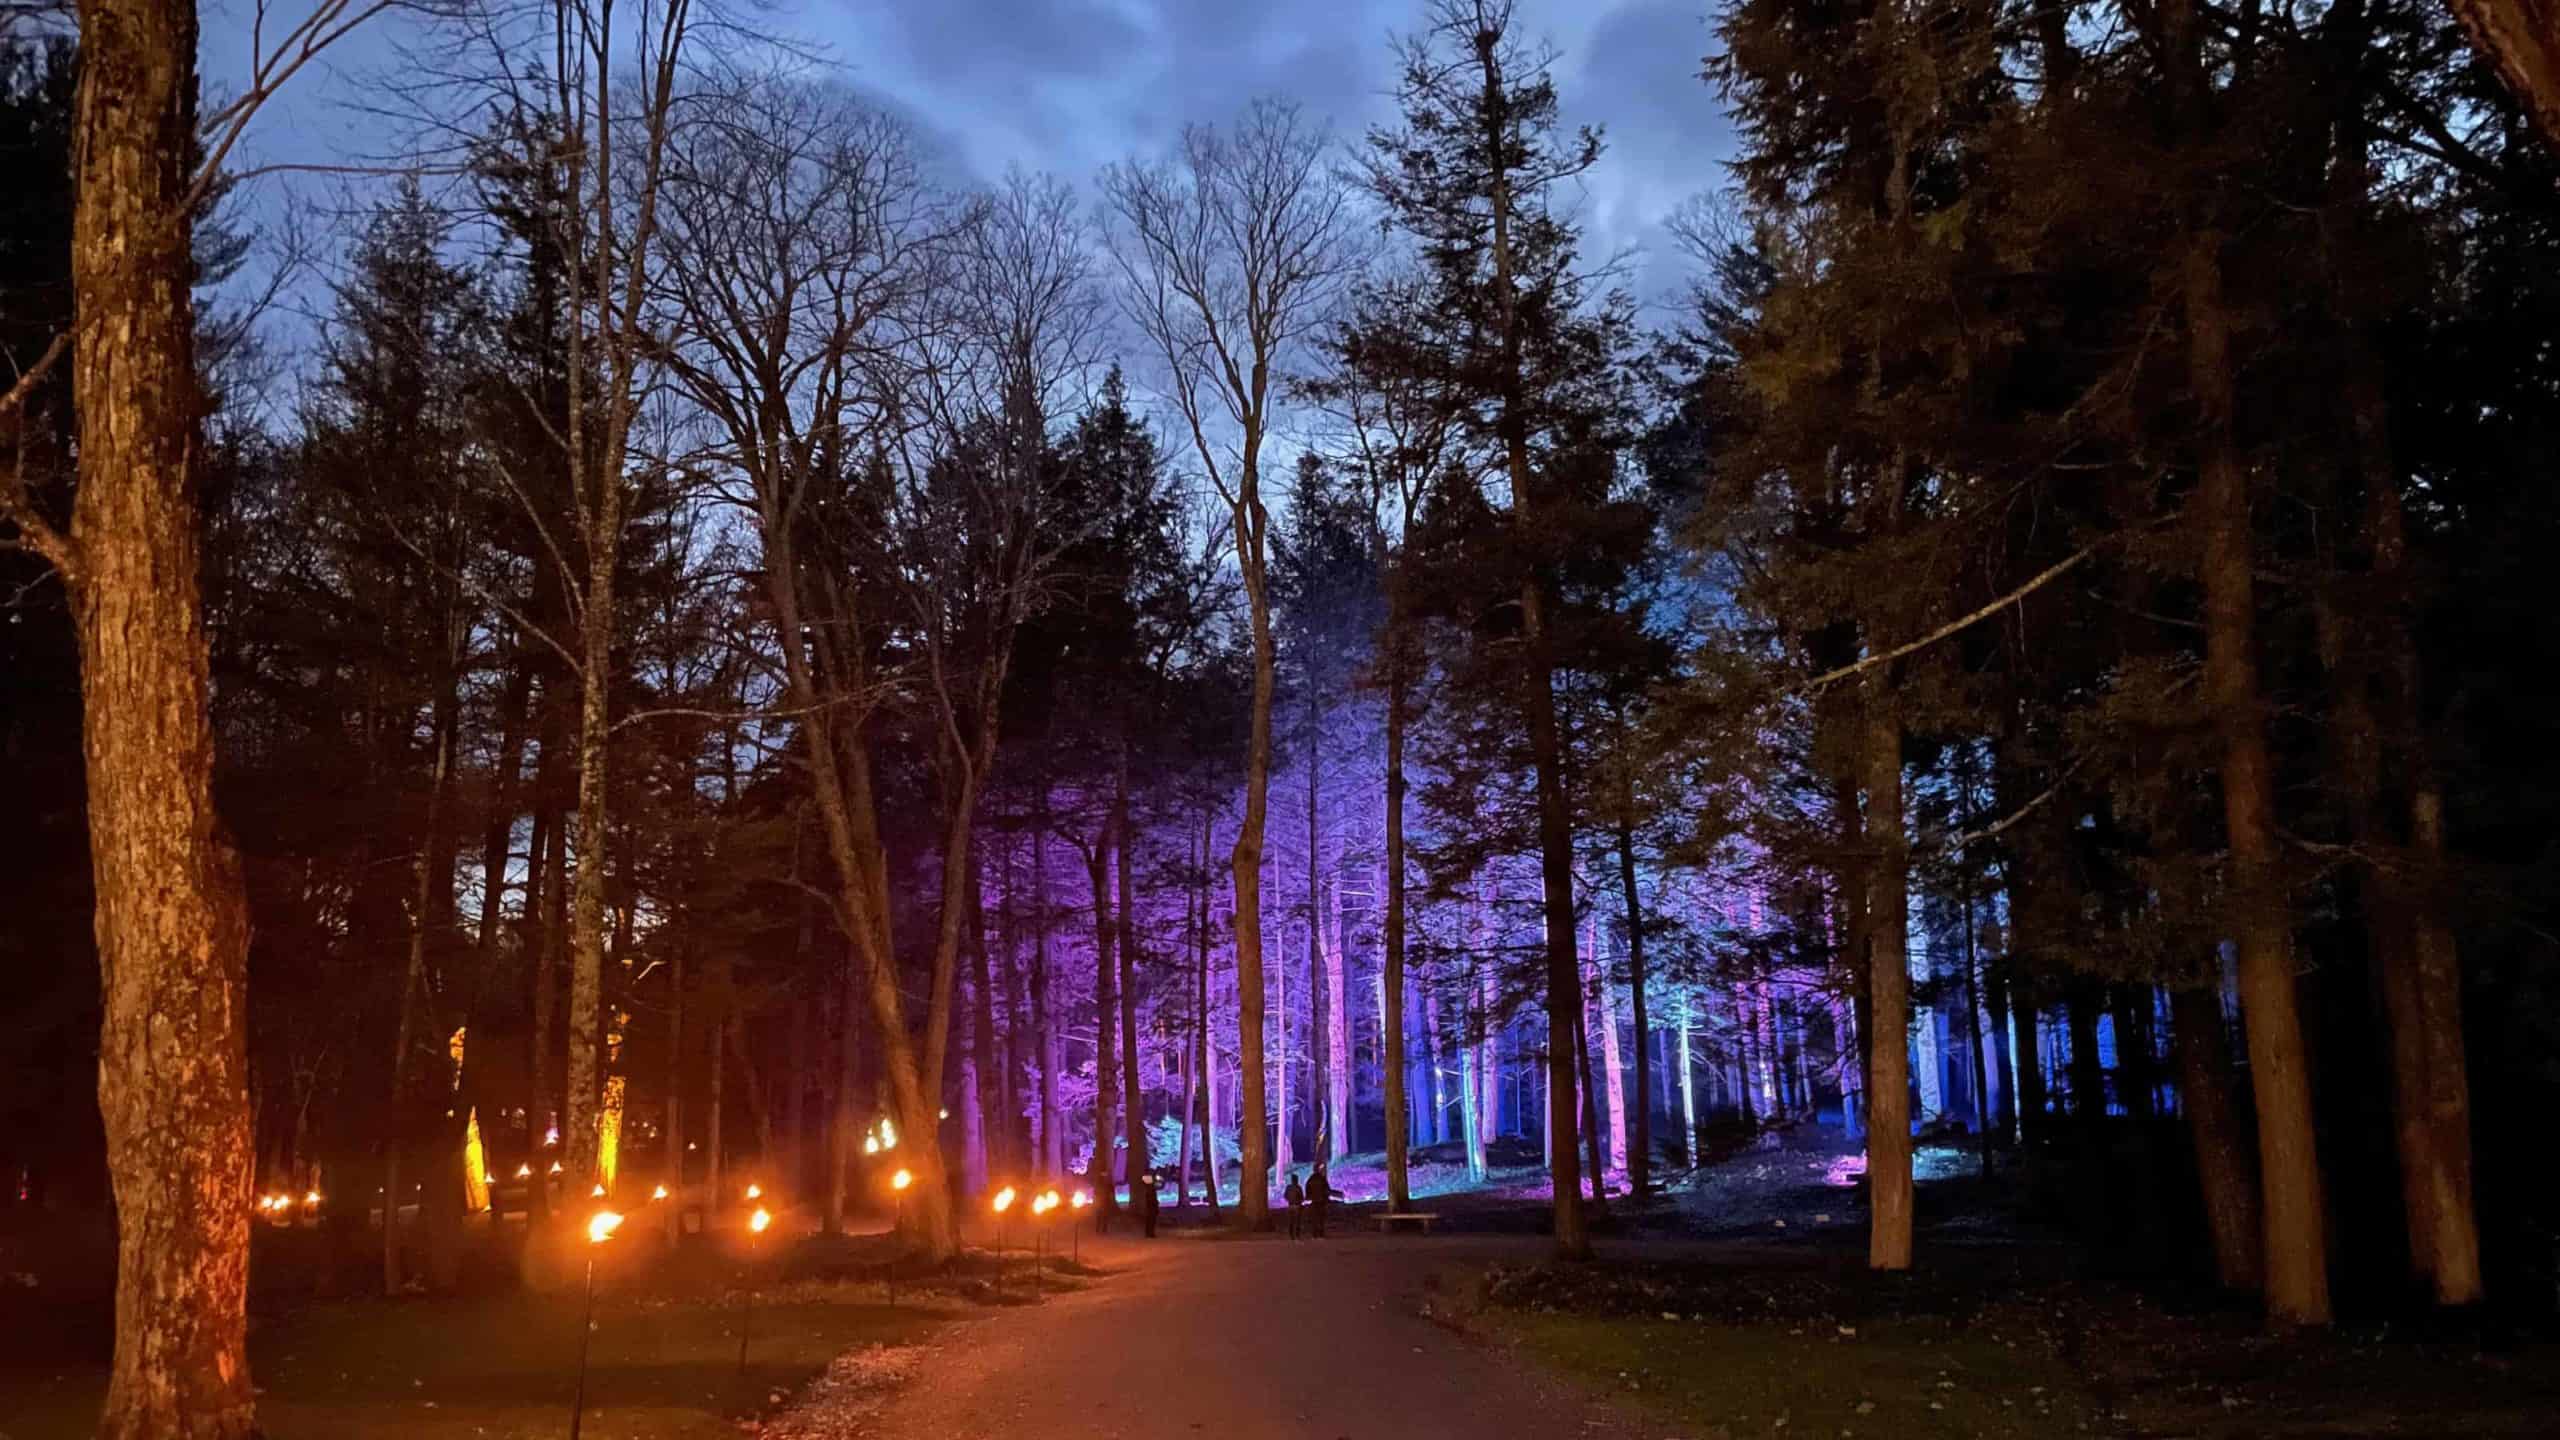 Torches light the way as the woods take on a deep purple light in NightWood at the Mount.